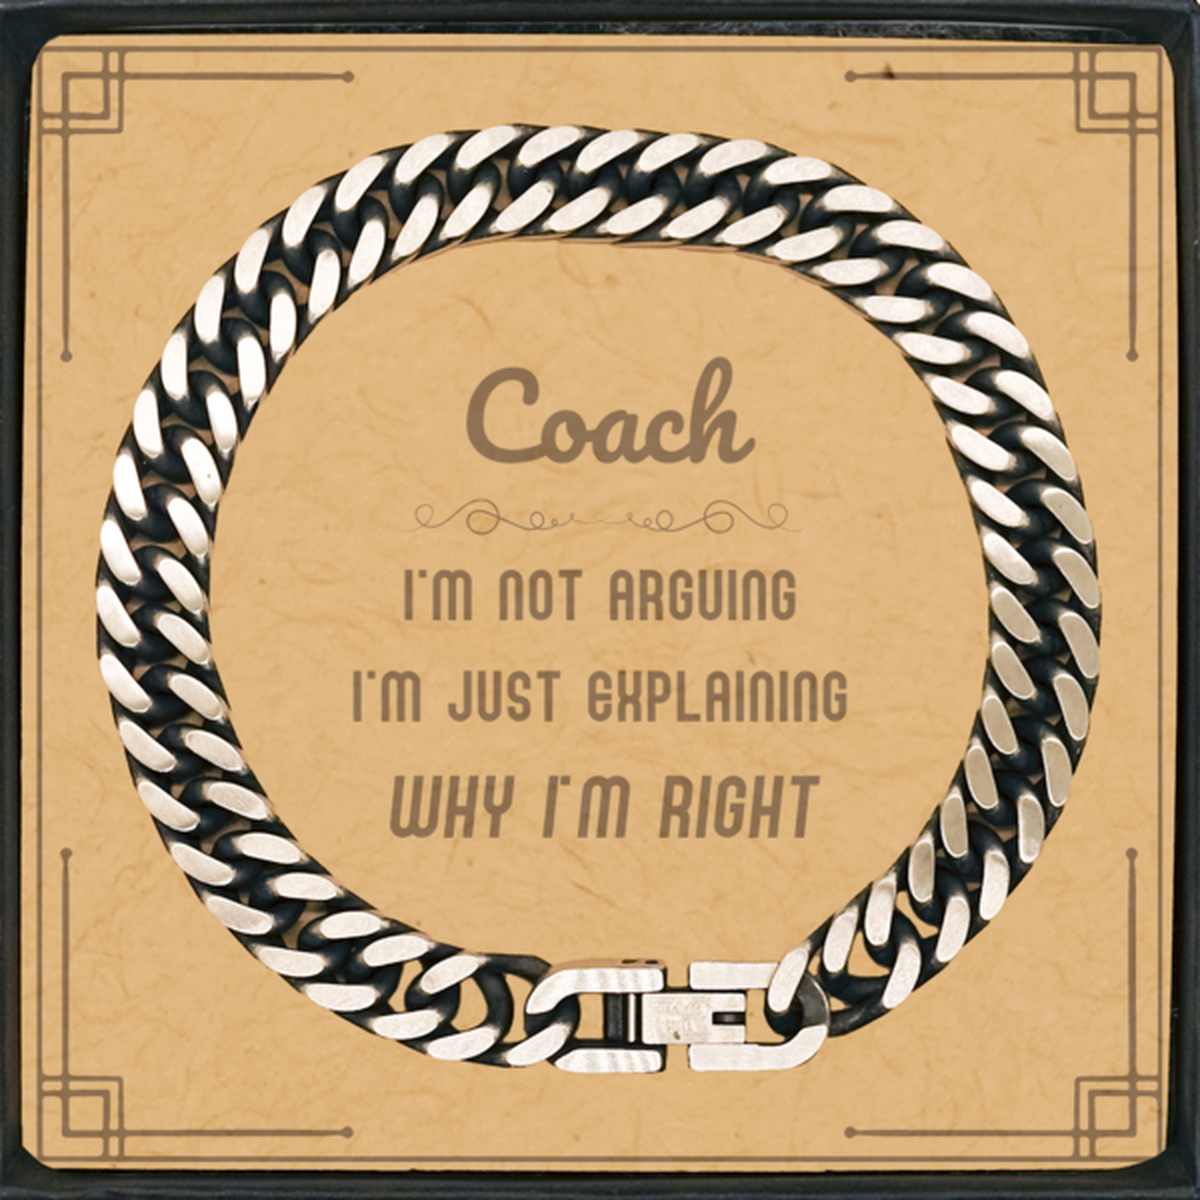 Coach I'm not Arguing. I'm Just Explaining Why I'm RIGHT Cuban Link Chain Bracelet, Funny Saying Quote Coach Gifts For Coach Message Card Graduation Birthday Christmas Gifts for Men Women Coworker